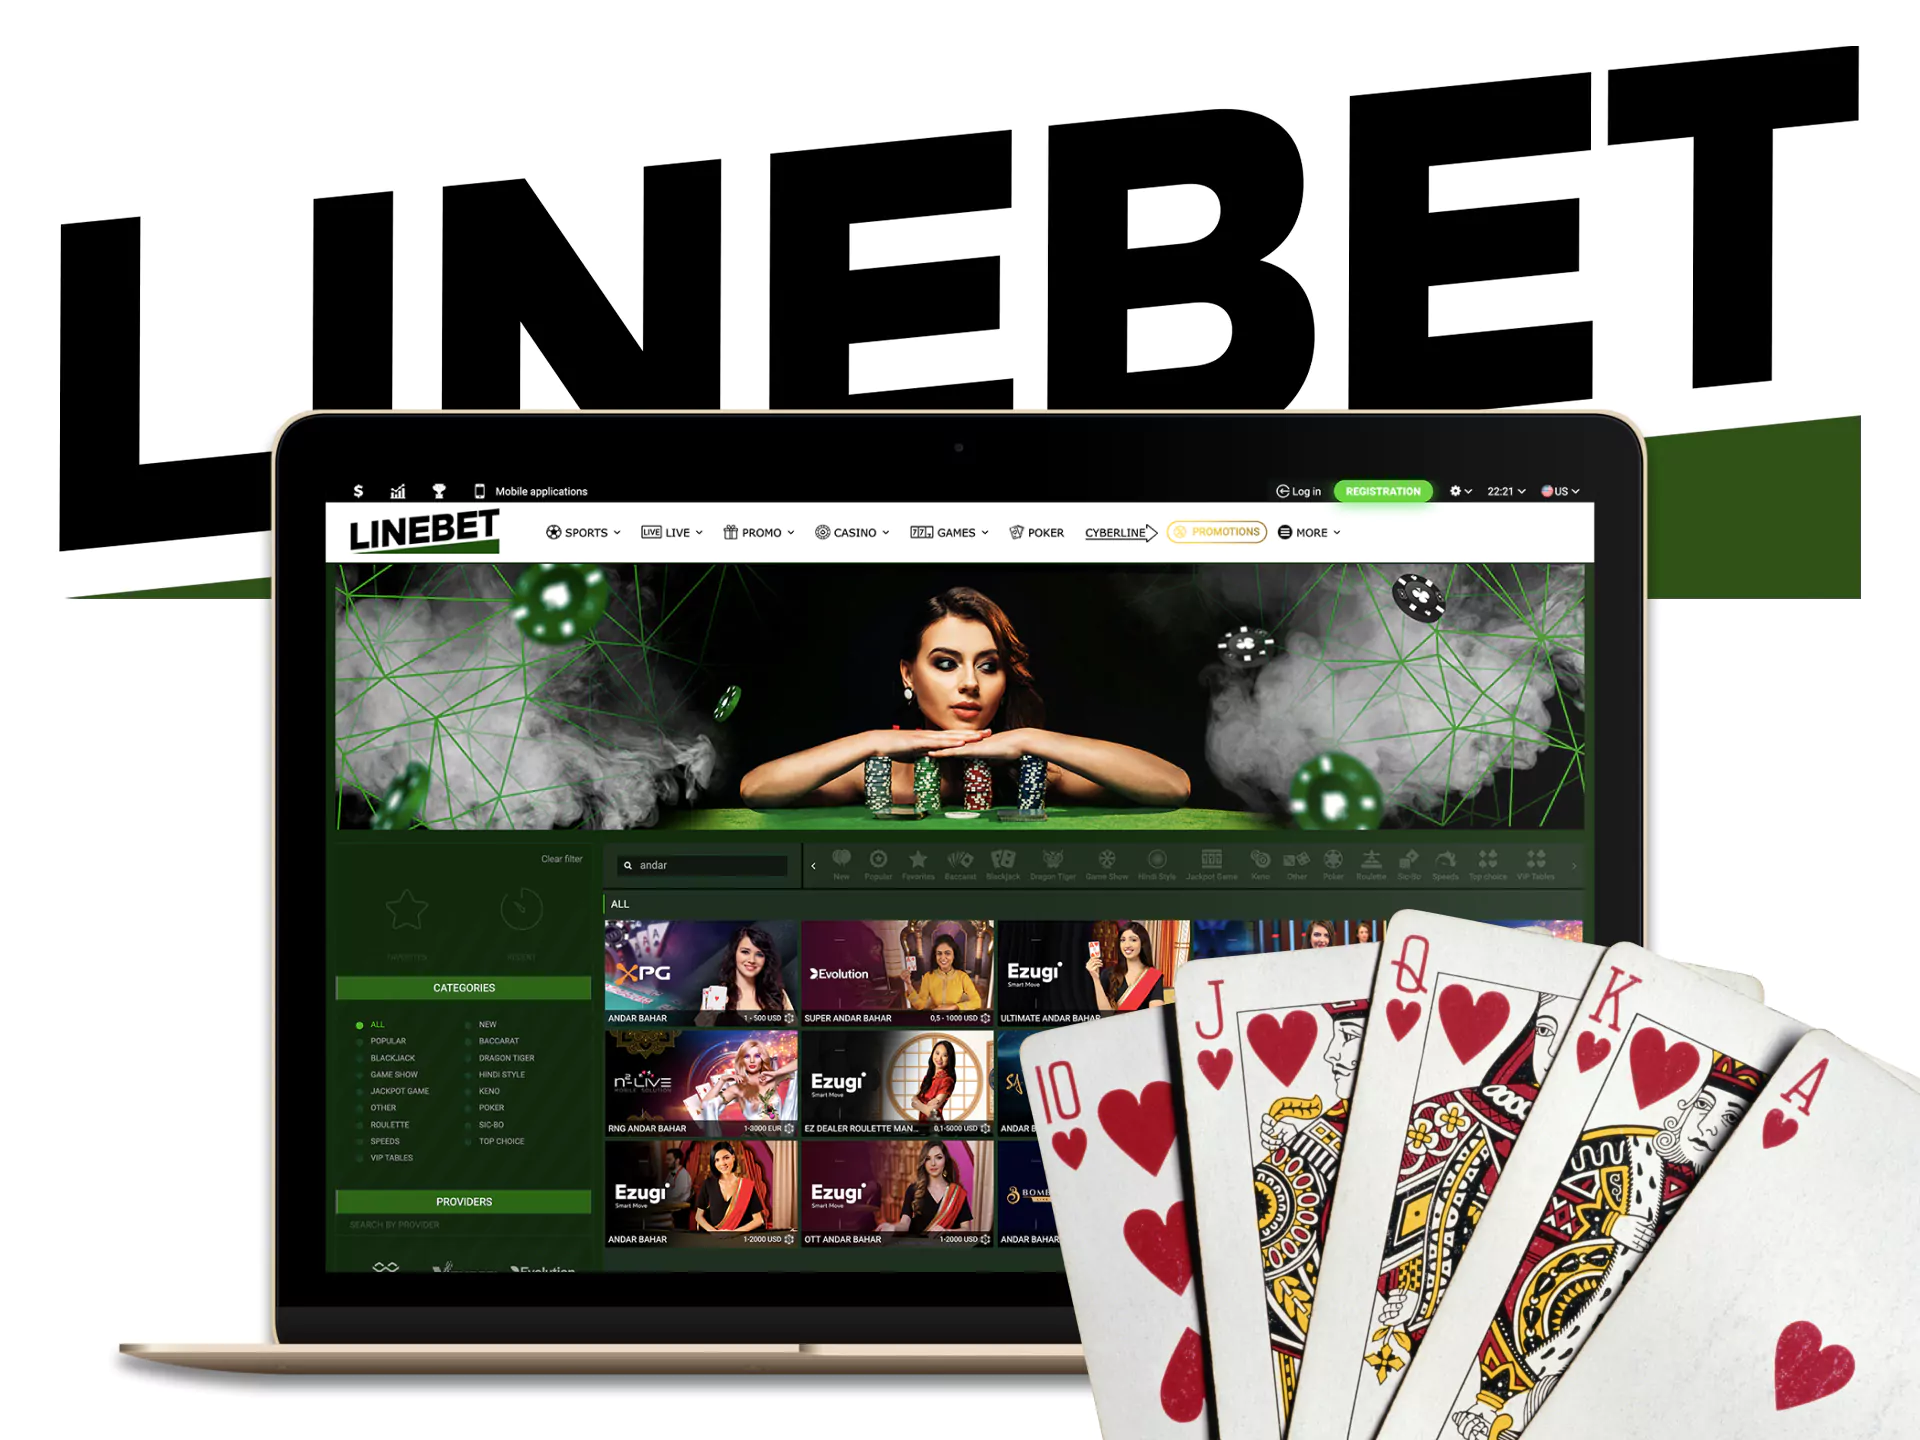 On Linebet you have the opportunity to play the game Andar Bahar.